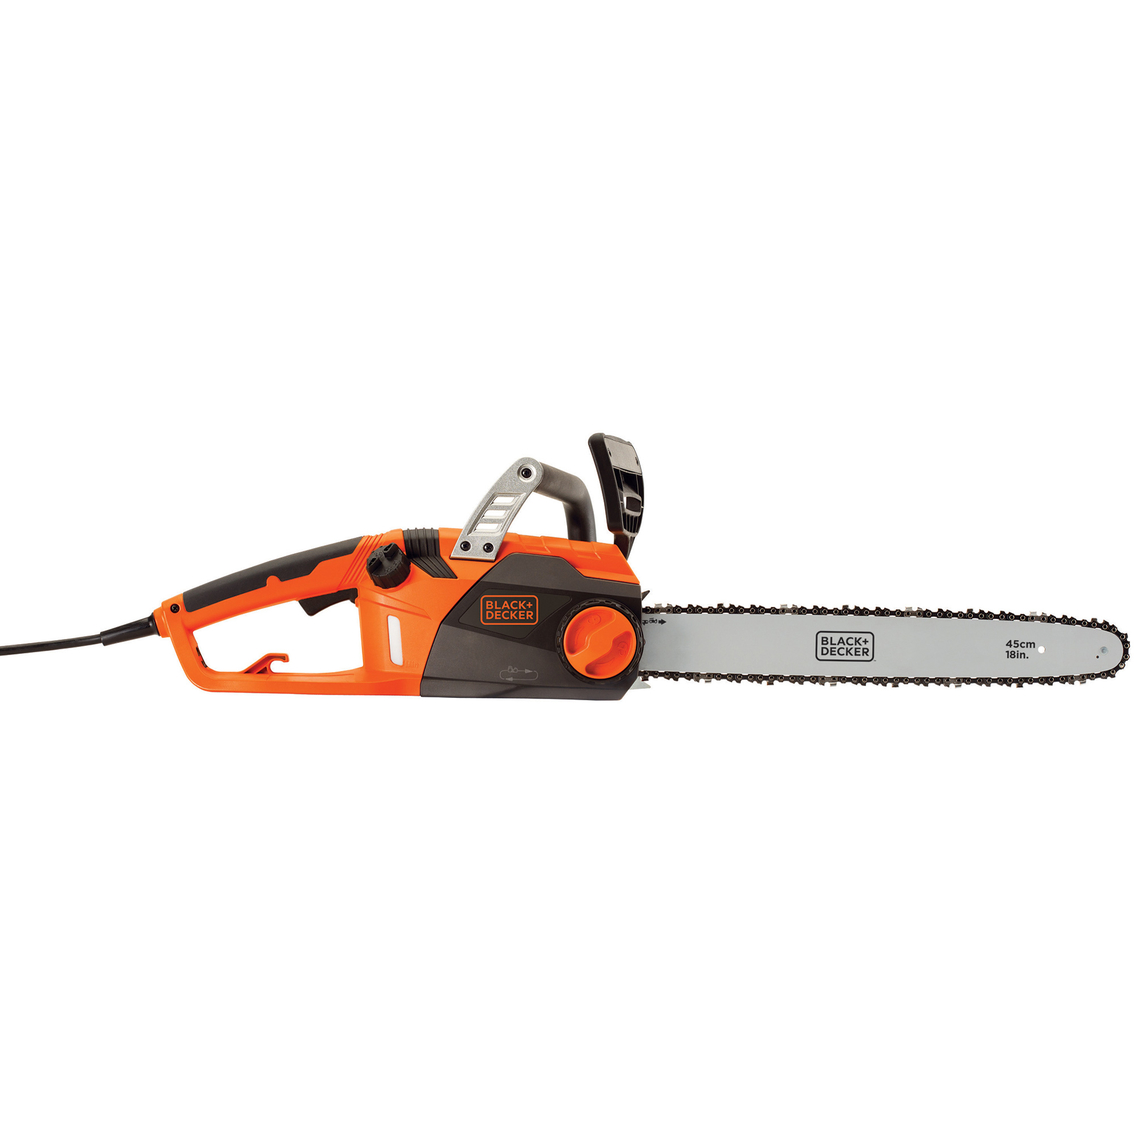 Black + Decker 15 Amp 18 in. Chainsaw - Image 2 of 7